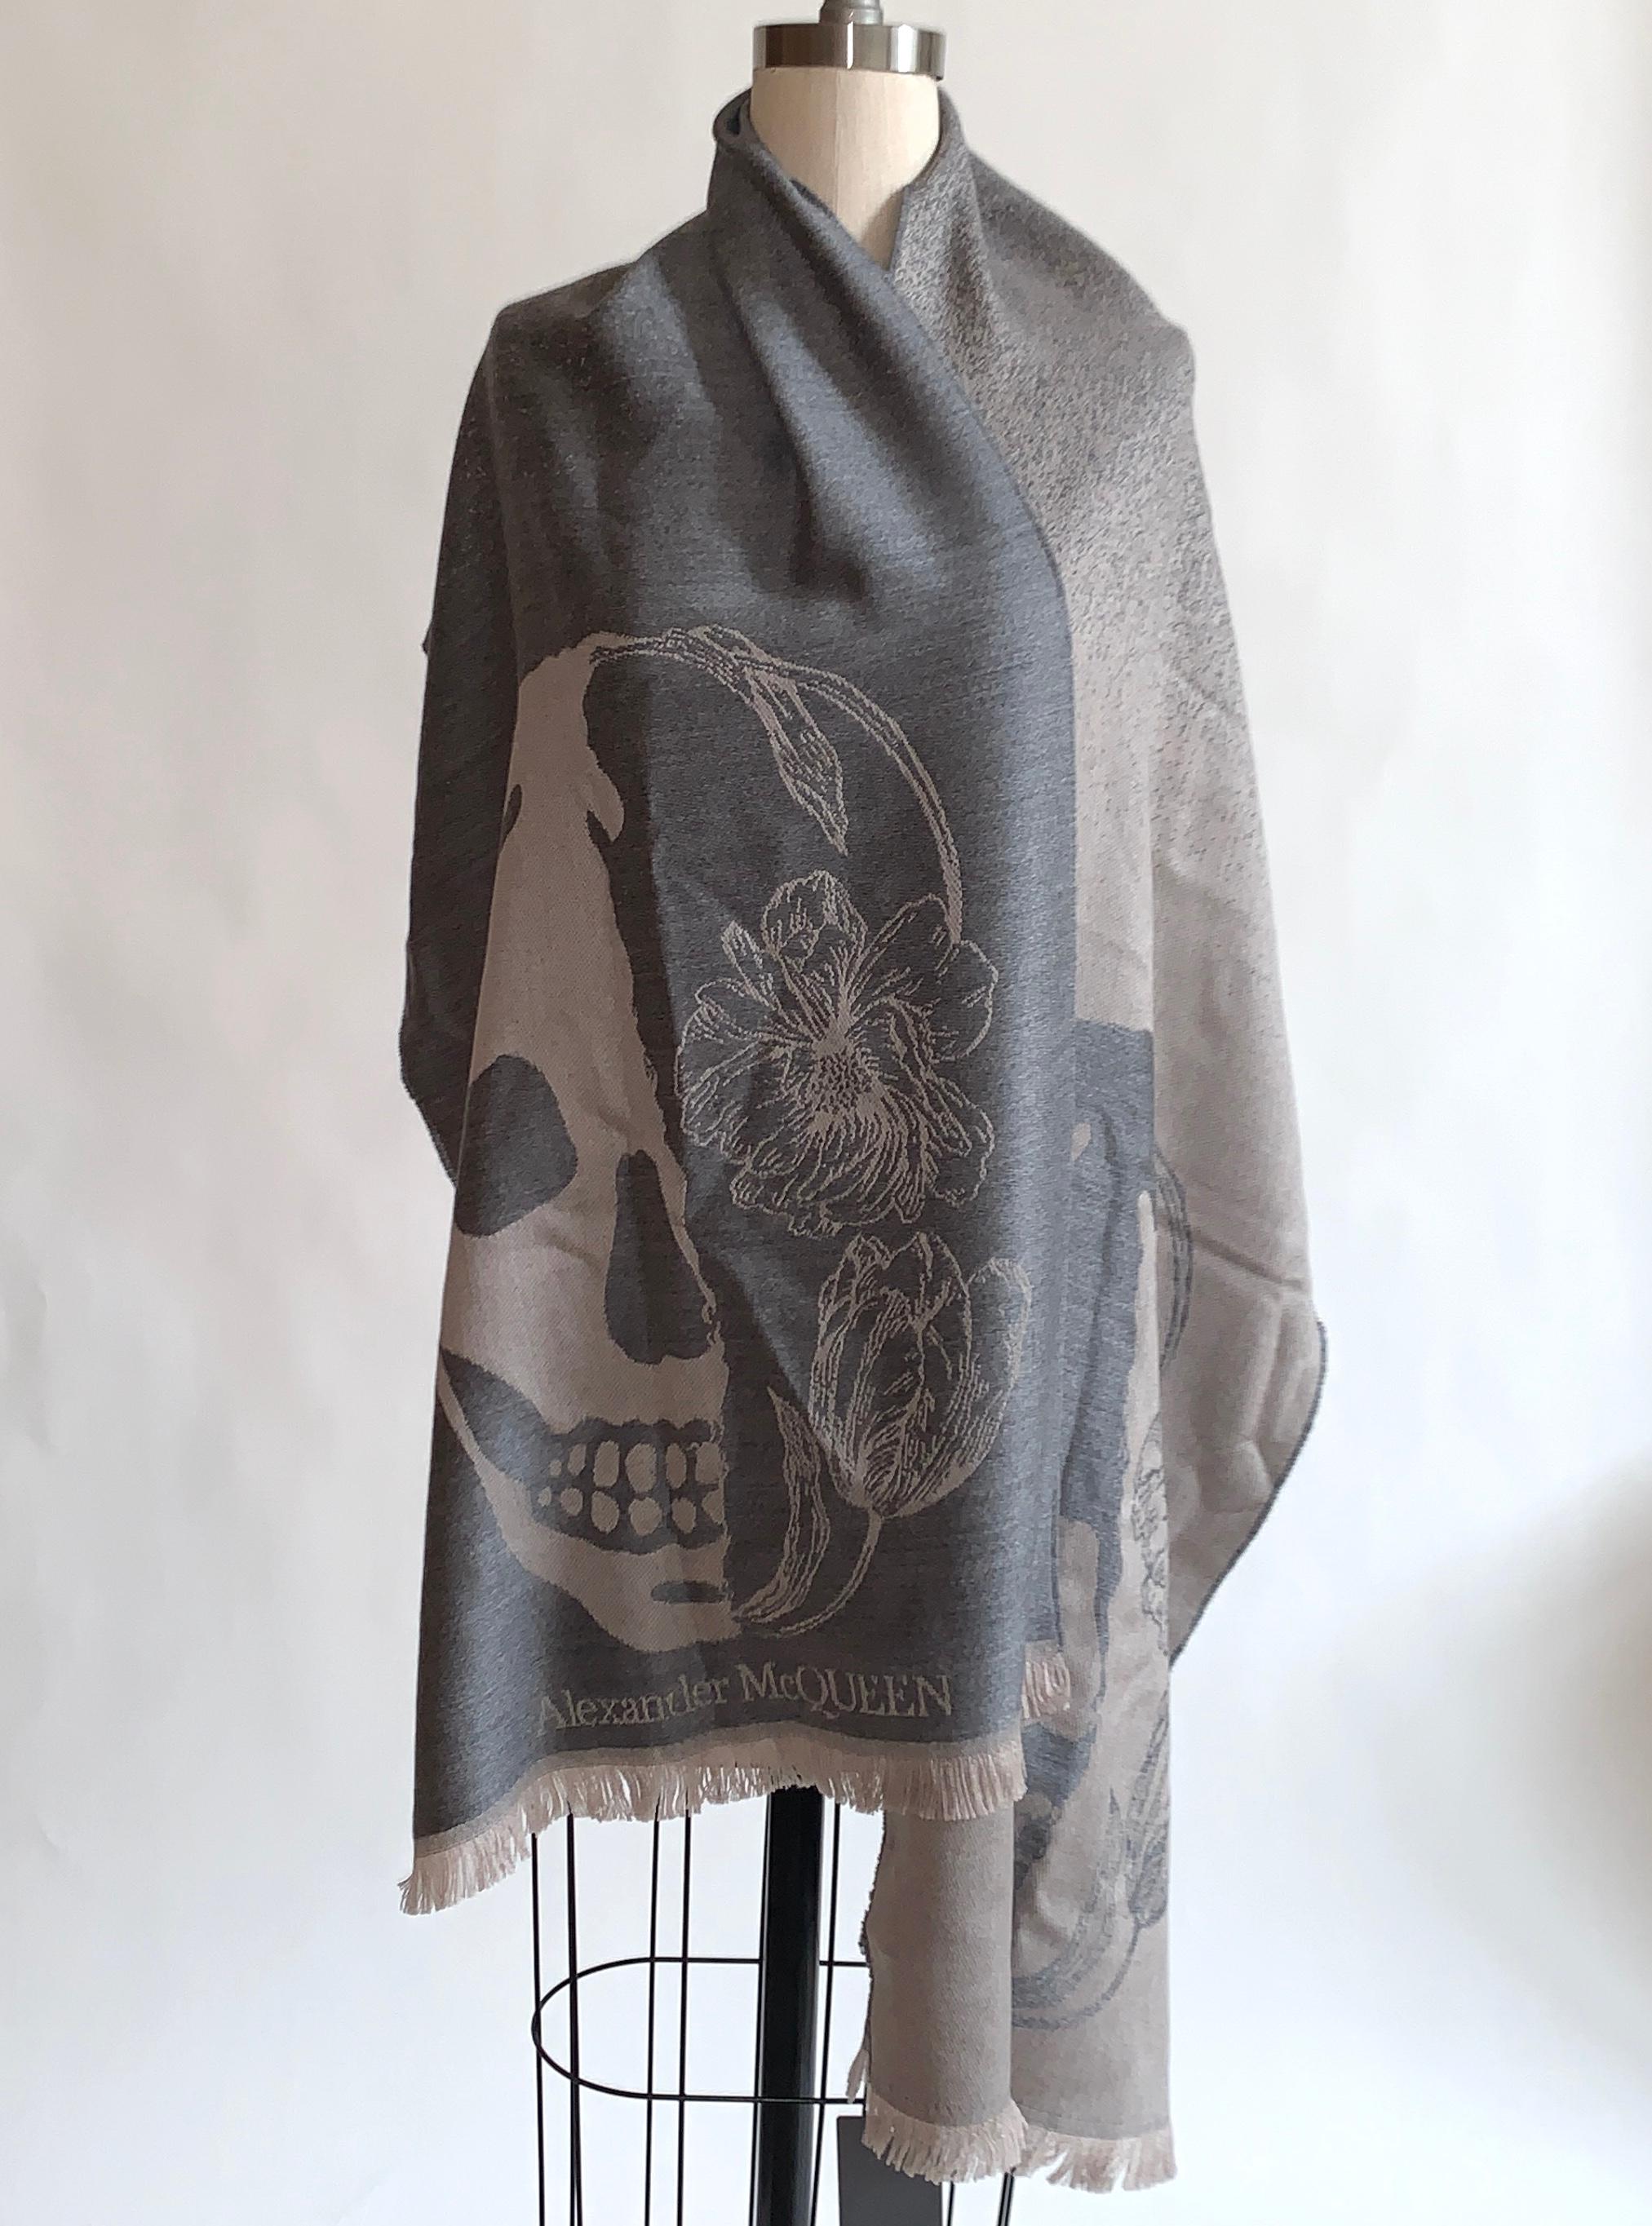 New Alexander McQueen large grey scarf featuring skull and flower print at each end. Super soft wool. Fades from darker grey at one end to lighter at the other. Light fringe at ends. Signed Alexander McQueen at one bottom corner.

Purchased directly